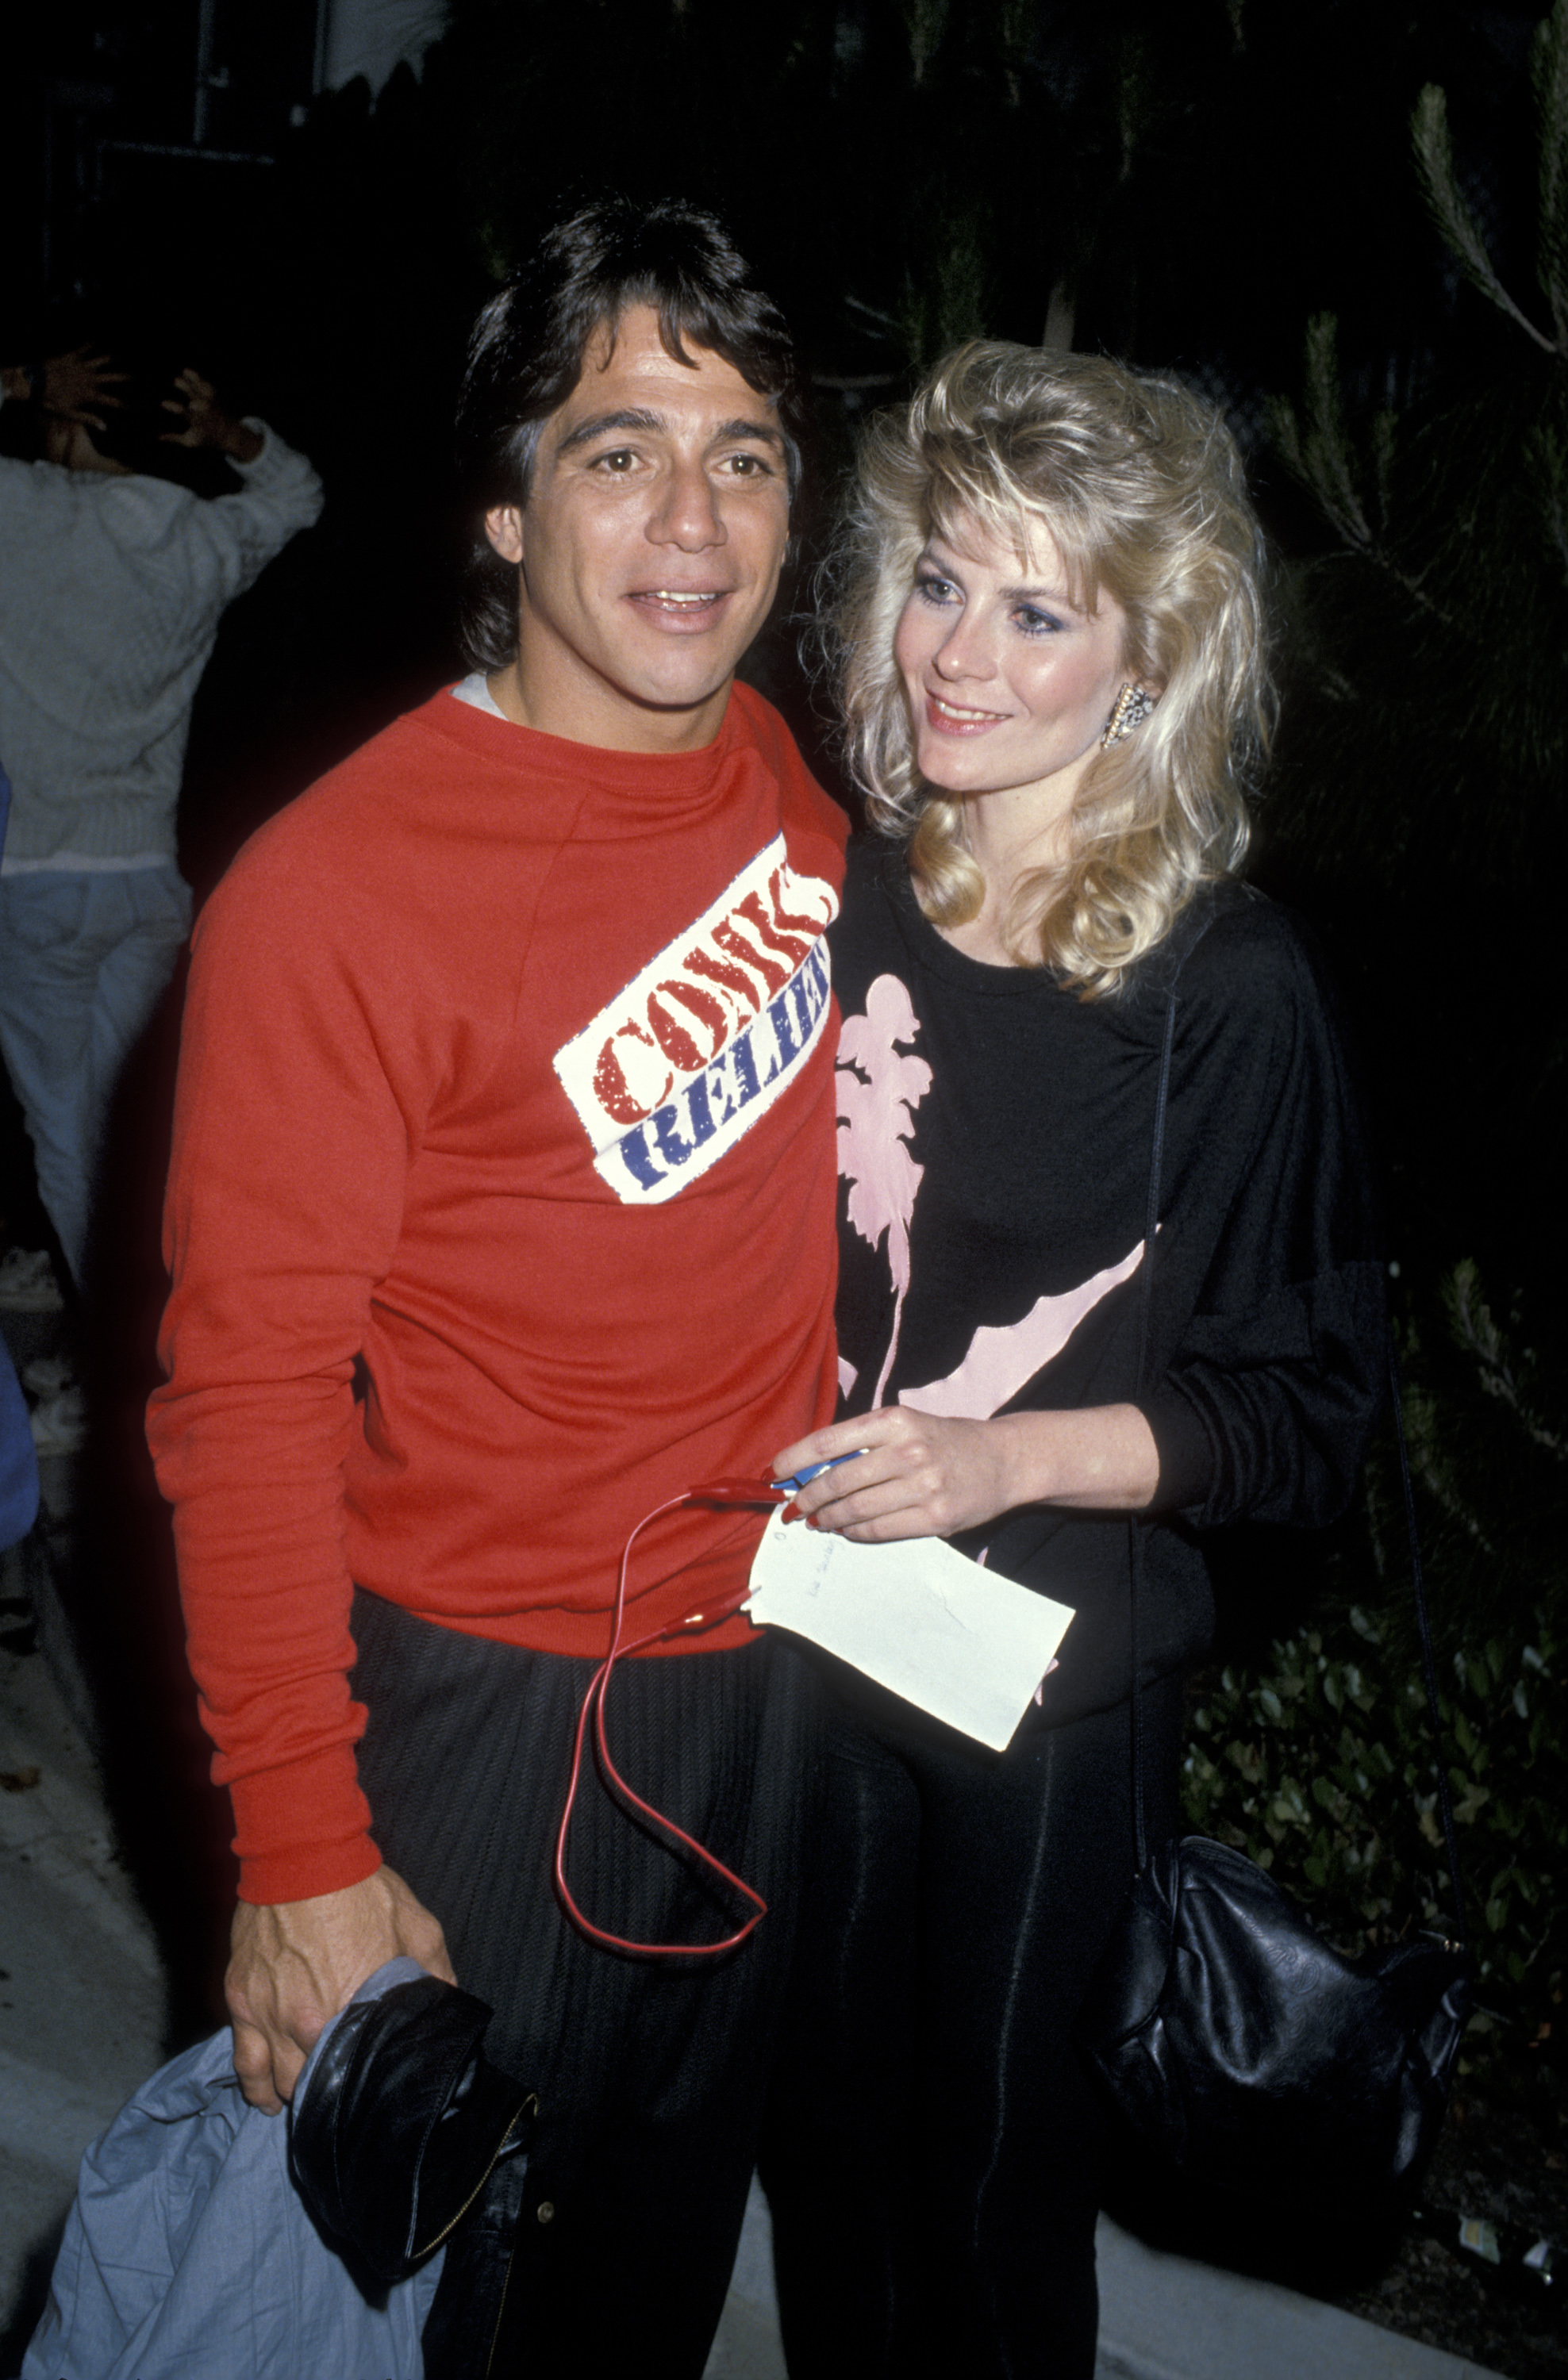 Tony Danza and Tracy Robinson during Comic Relief - March 29, 1986 at Universal Ampitheater in Universal City, California, United States | Source: Getty Images